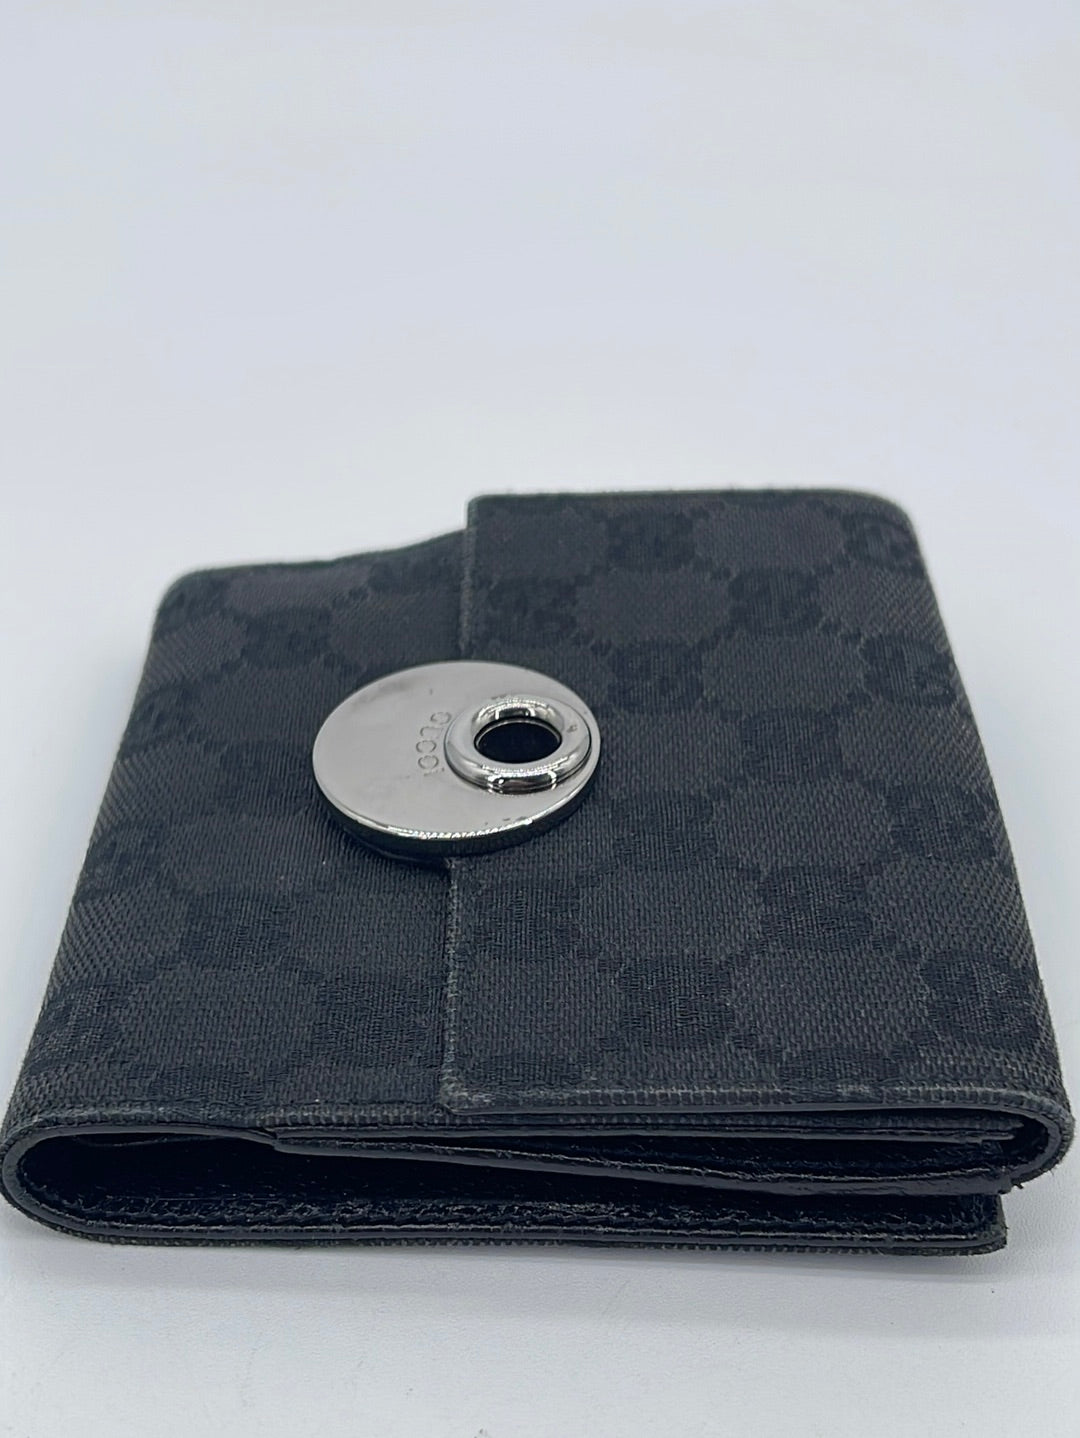 PRELOVED Gucci Black GG Canvas Eclipse Compact Wallet 1209323661 061423